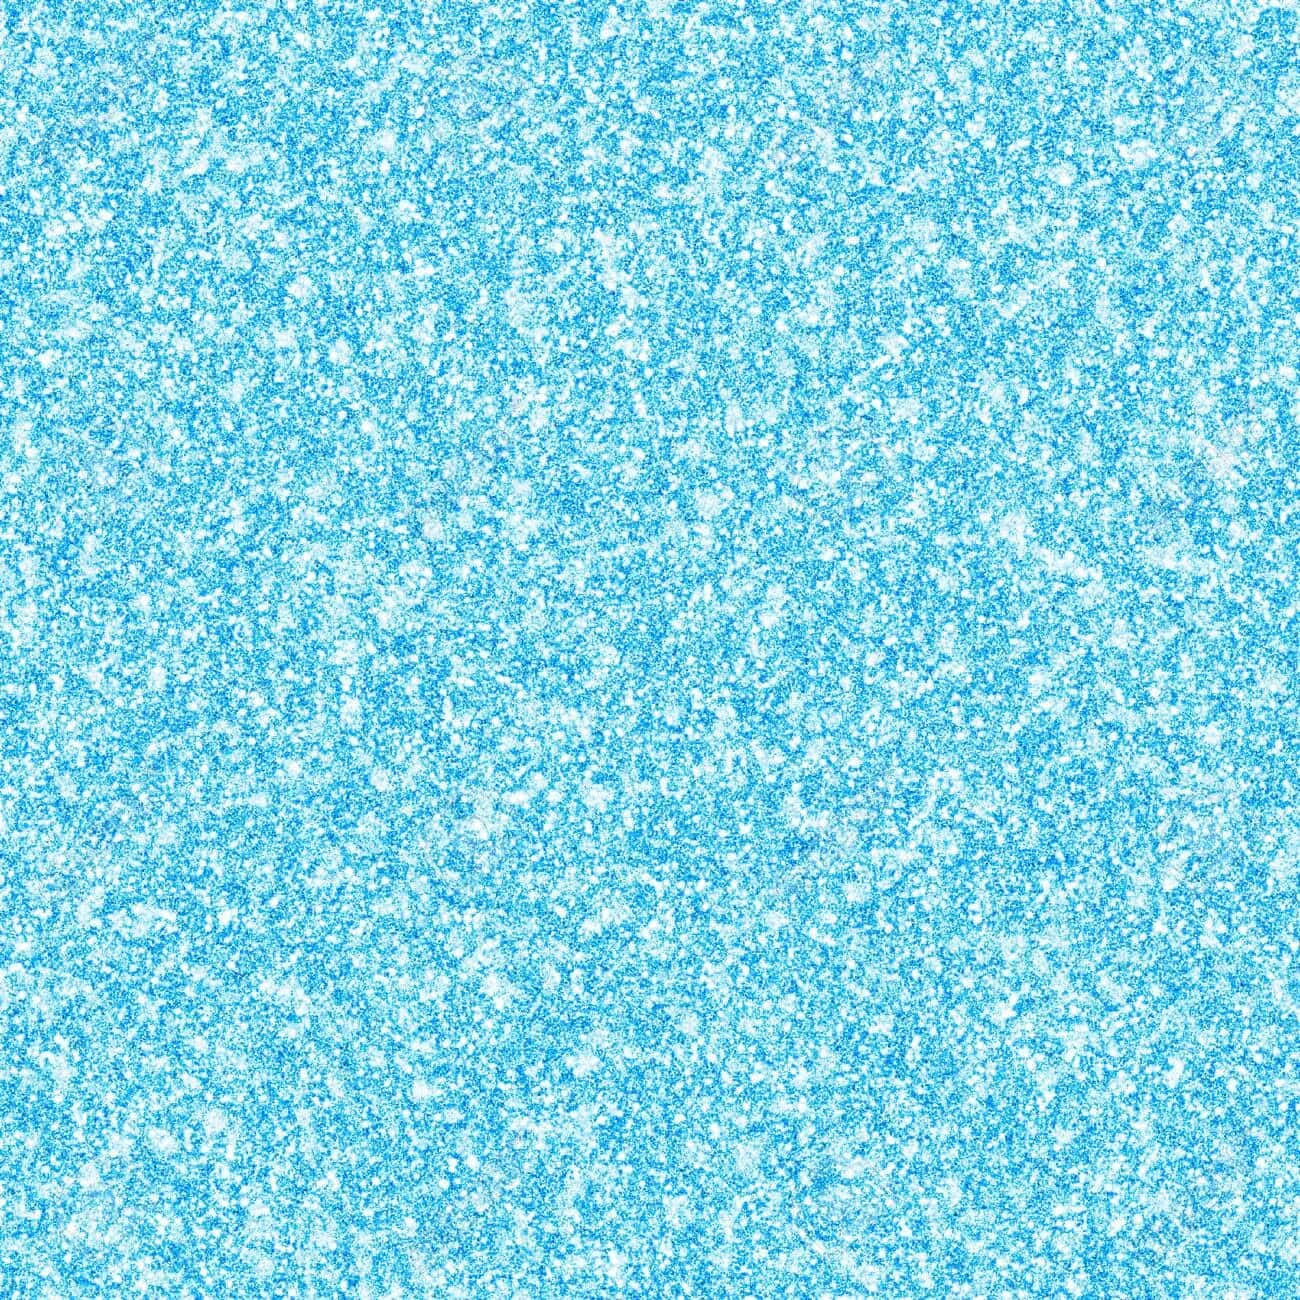 Light And Sparkly Blue Background